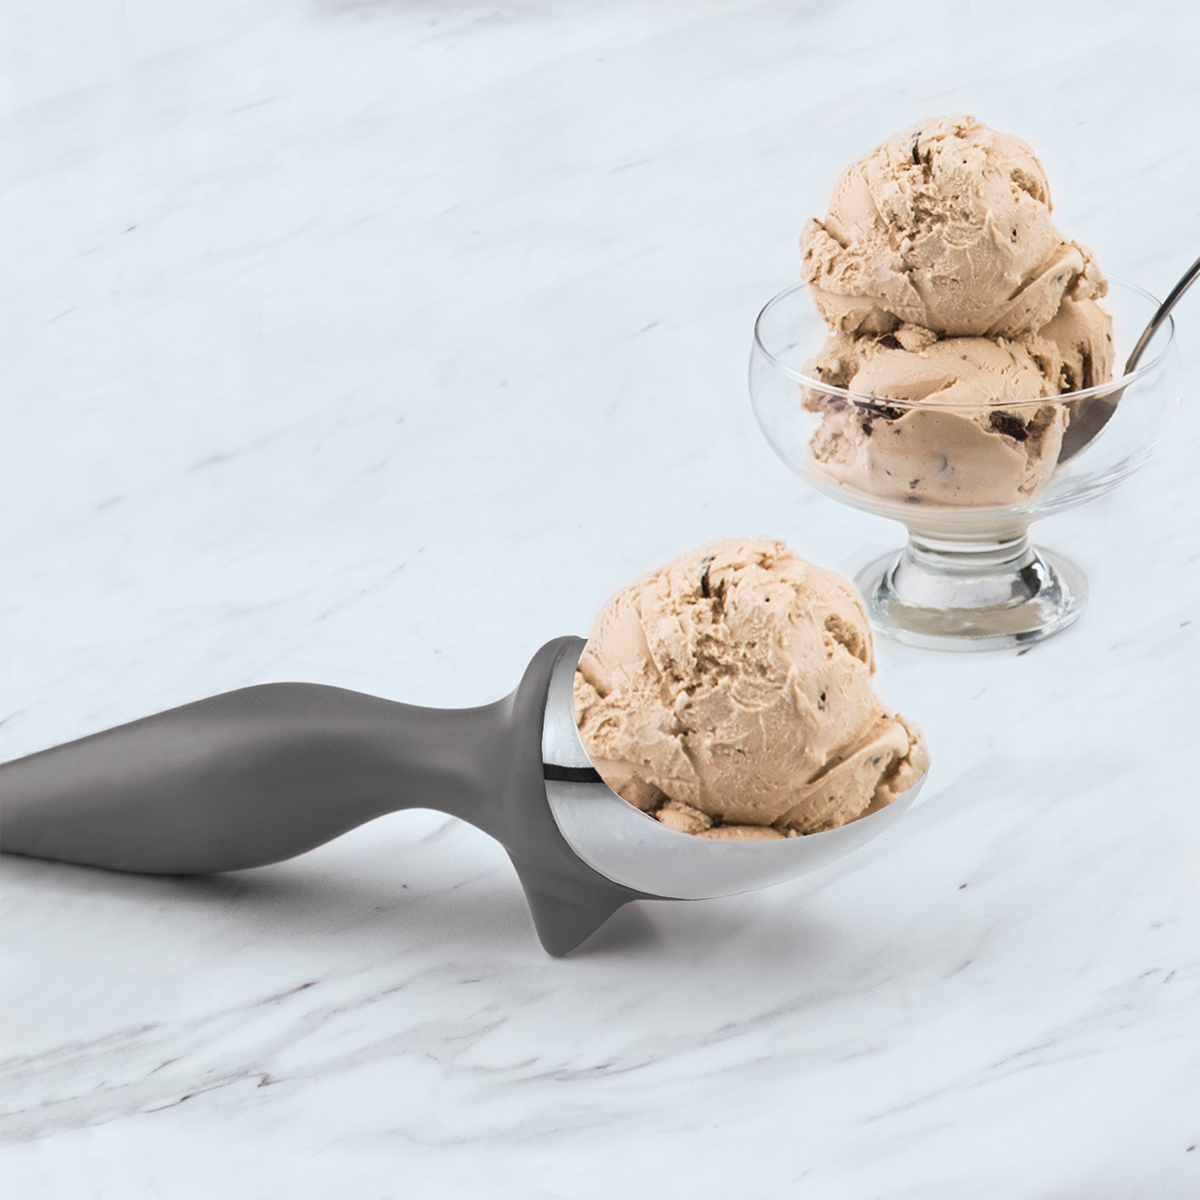 https://www.containerstore.com/catalogimages/424407/10086195-Tovolo-Ice-Cream-Scoop-VEN2.jpg